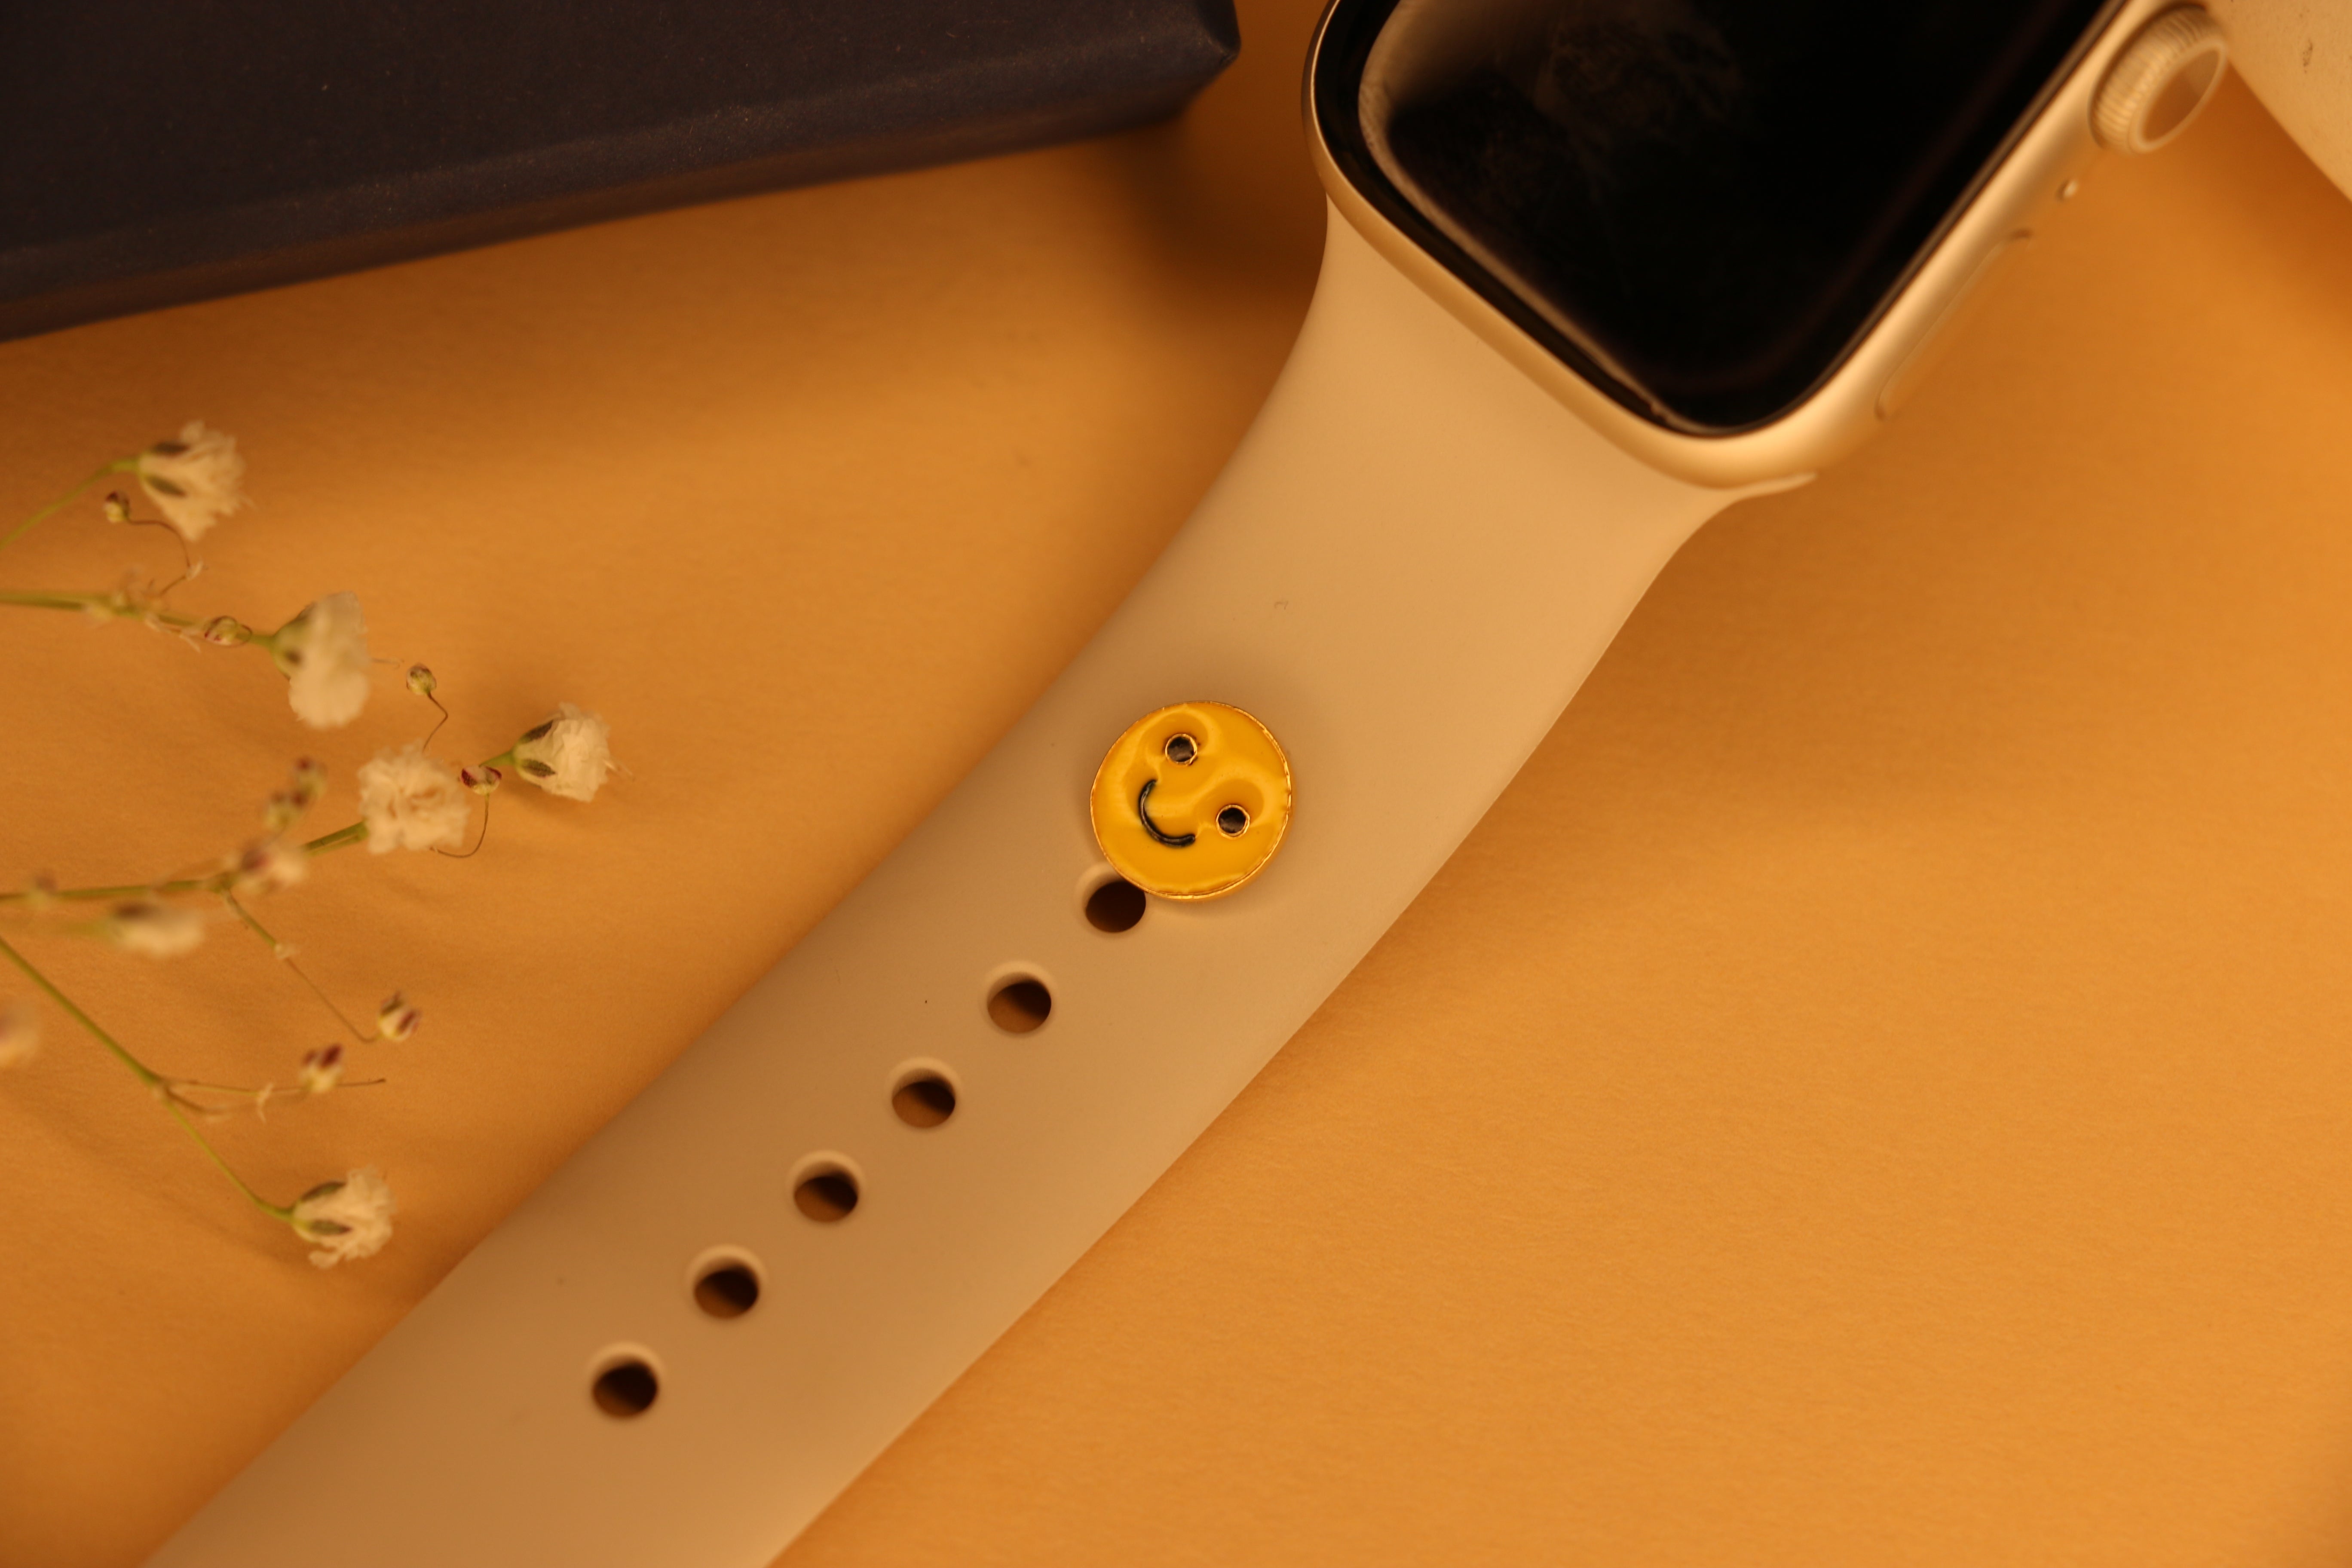 Smiley watch button